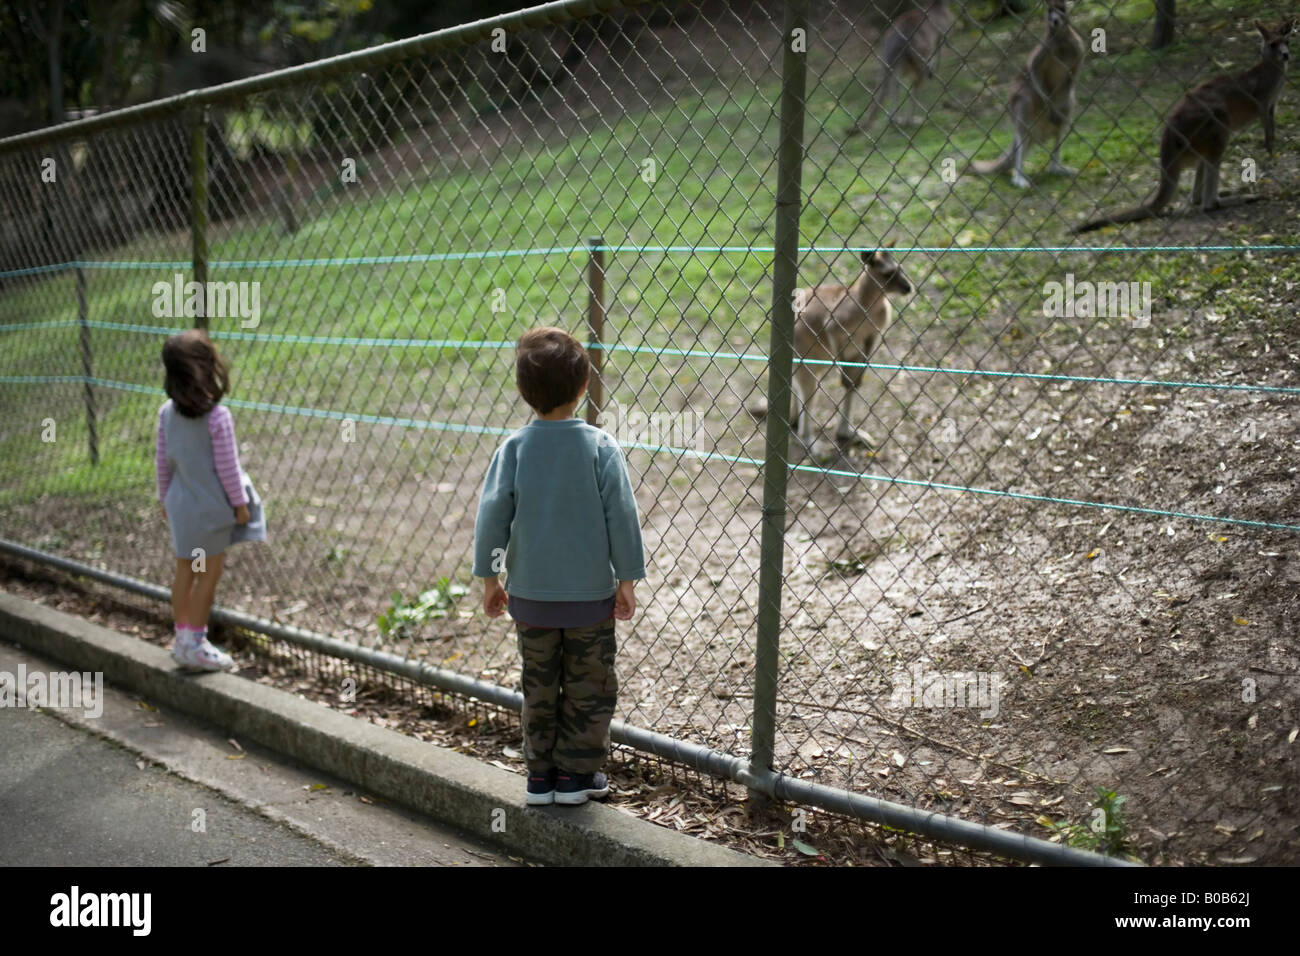 Boy aged six and his sister aged four watch the Kangaroos through a chainlink fence at Wellington Zoo, New Zealand Stock Photo